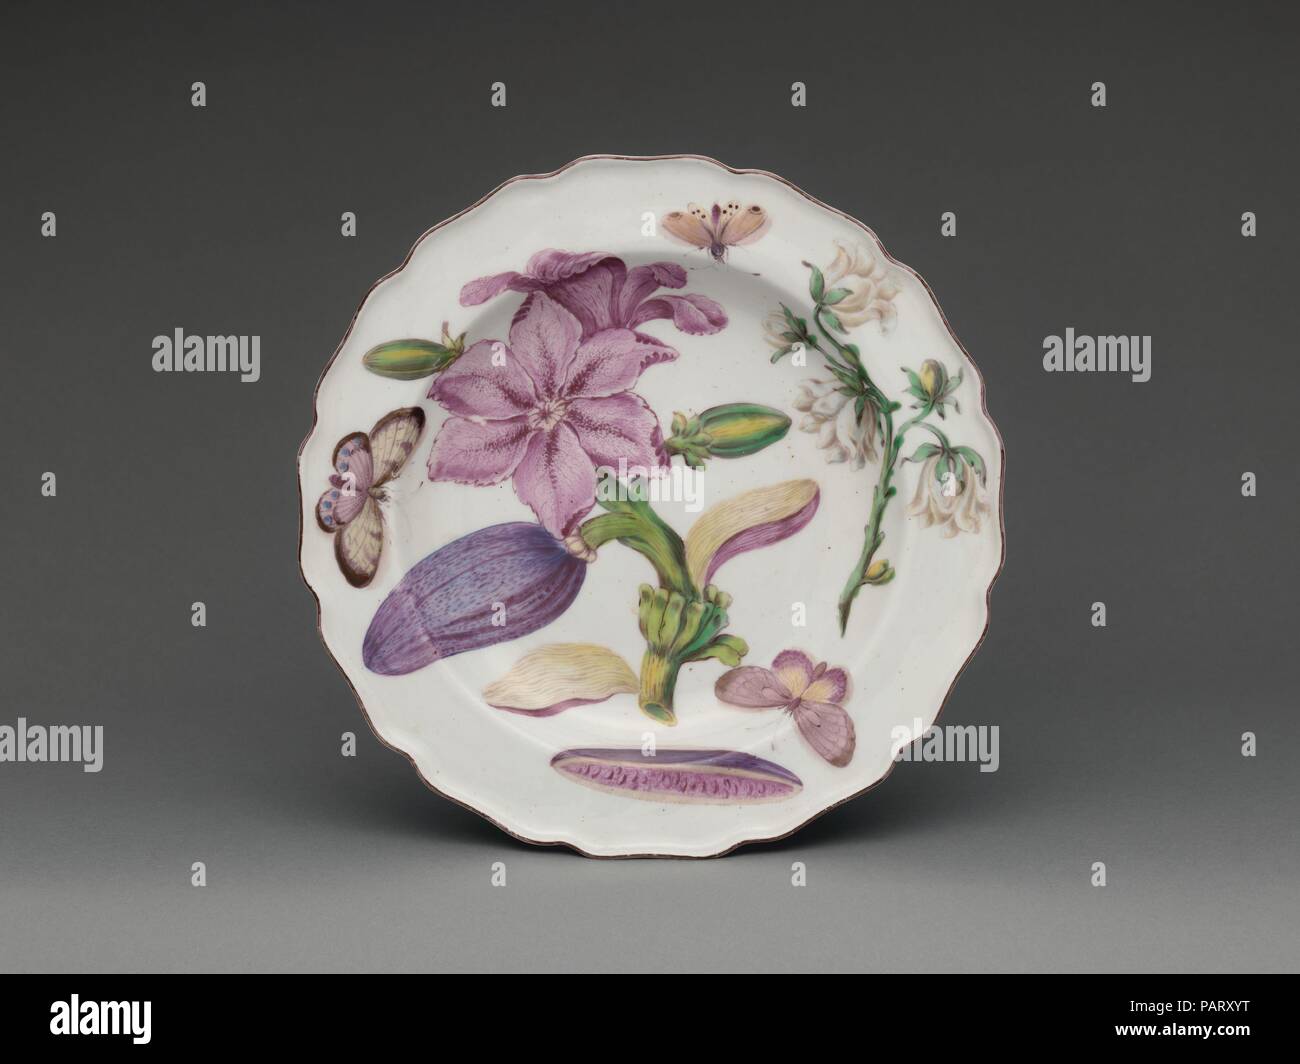 Botanical plate with a flowering eggplant. Culture: British, Chelsea. Dimensions: Overall (confirmed): 1 3/8 × 9 1/16 × 9 1/16 in., 1 lb. (3.5 × 23 × 23 cm, 0.5 kg). Maker: Chelsea Porcelain Manufactory (British, 1745-1784, Red Anchor Period, ca. 1753-58). Date: ca. 1755.  These botanical plates (2016.217-.226) were produced by the Chelsea factory around 1755 and are often referred to as Chelsea 'Hans Sloane' wares, in reference to the royal physician, traveler, and natural historian who helped transform the Chelsea Physik Garden into a center of botanical knowledge during the British Enlighte Stock Photo